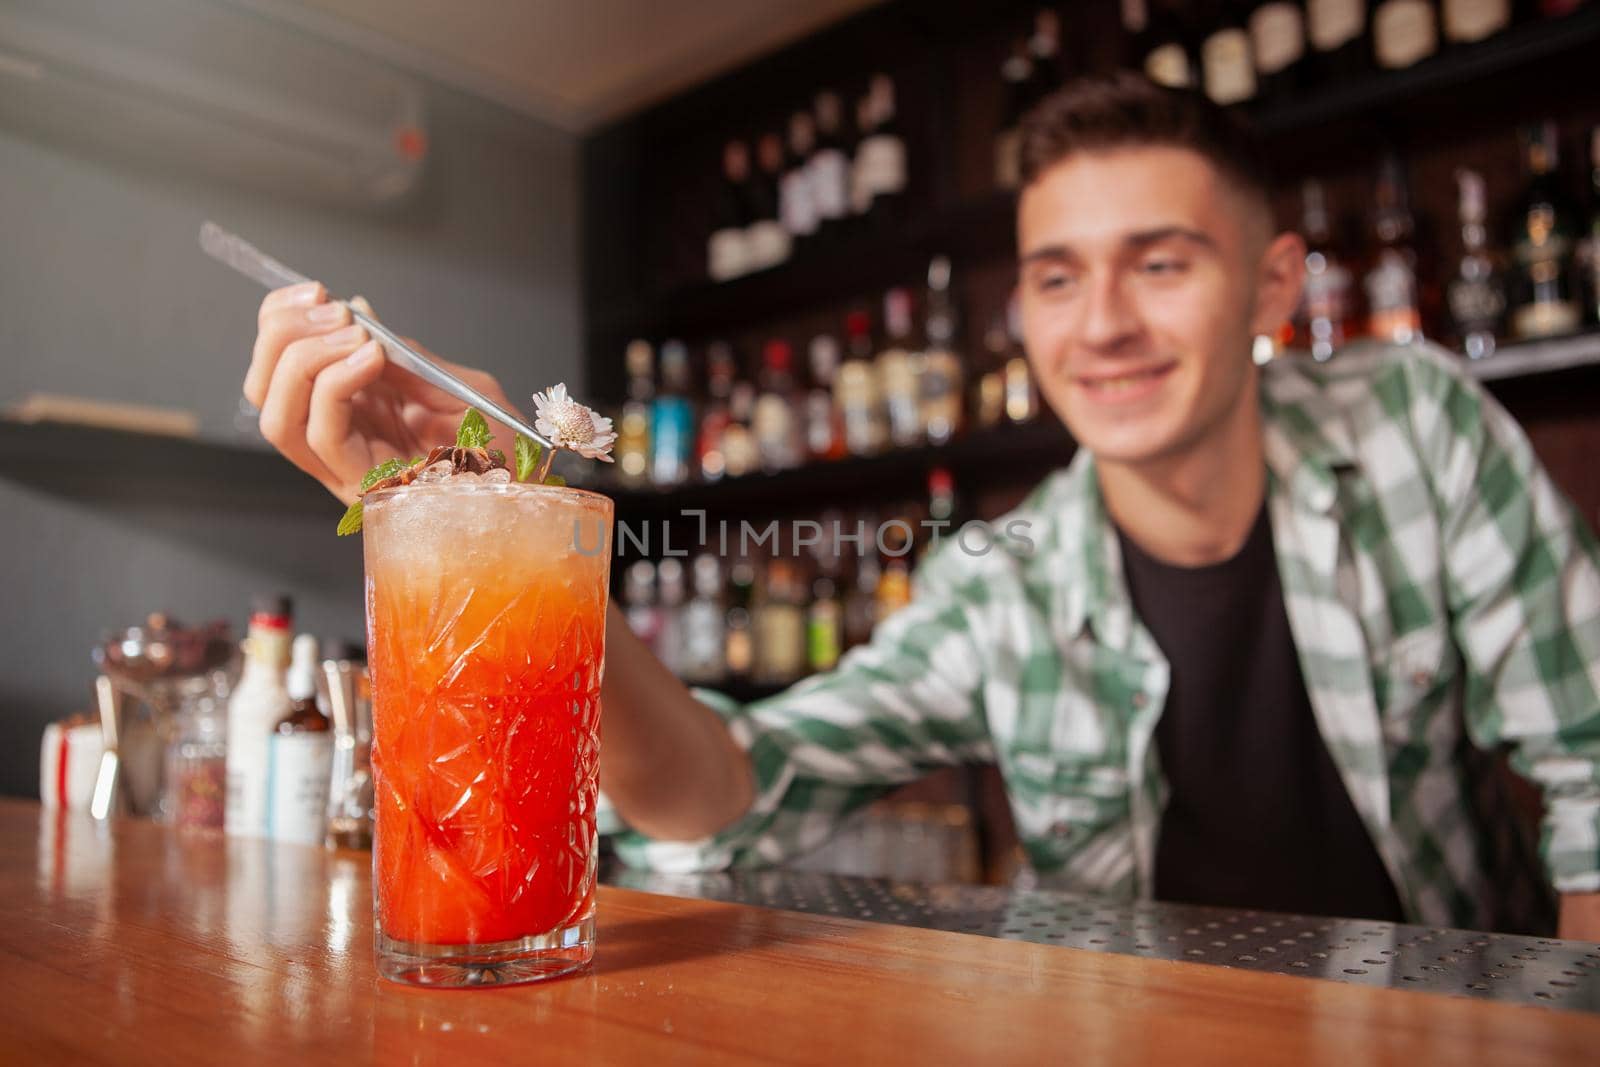 Selective focus on cocktail glass, cheerful bartender garnishing drink for a customer